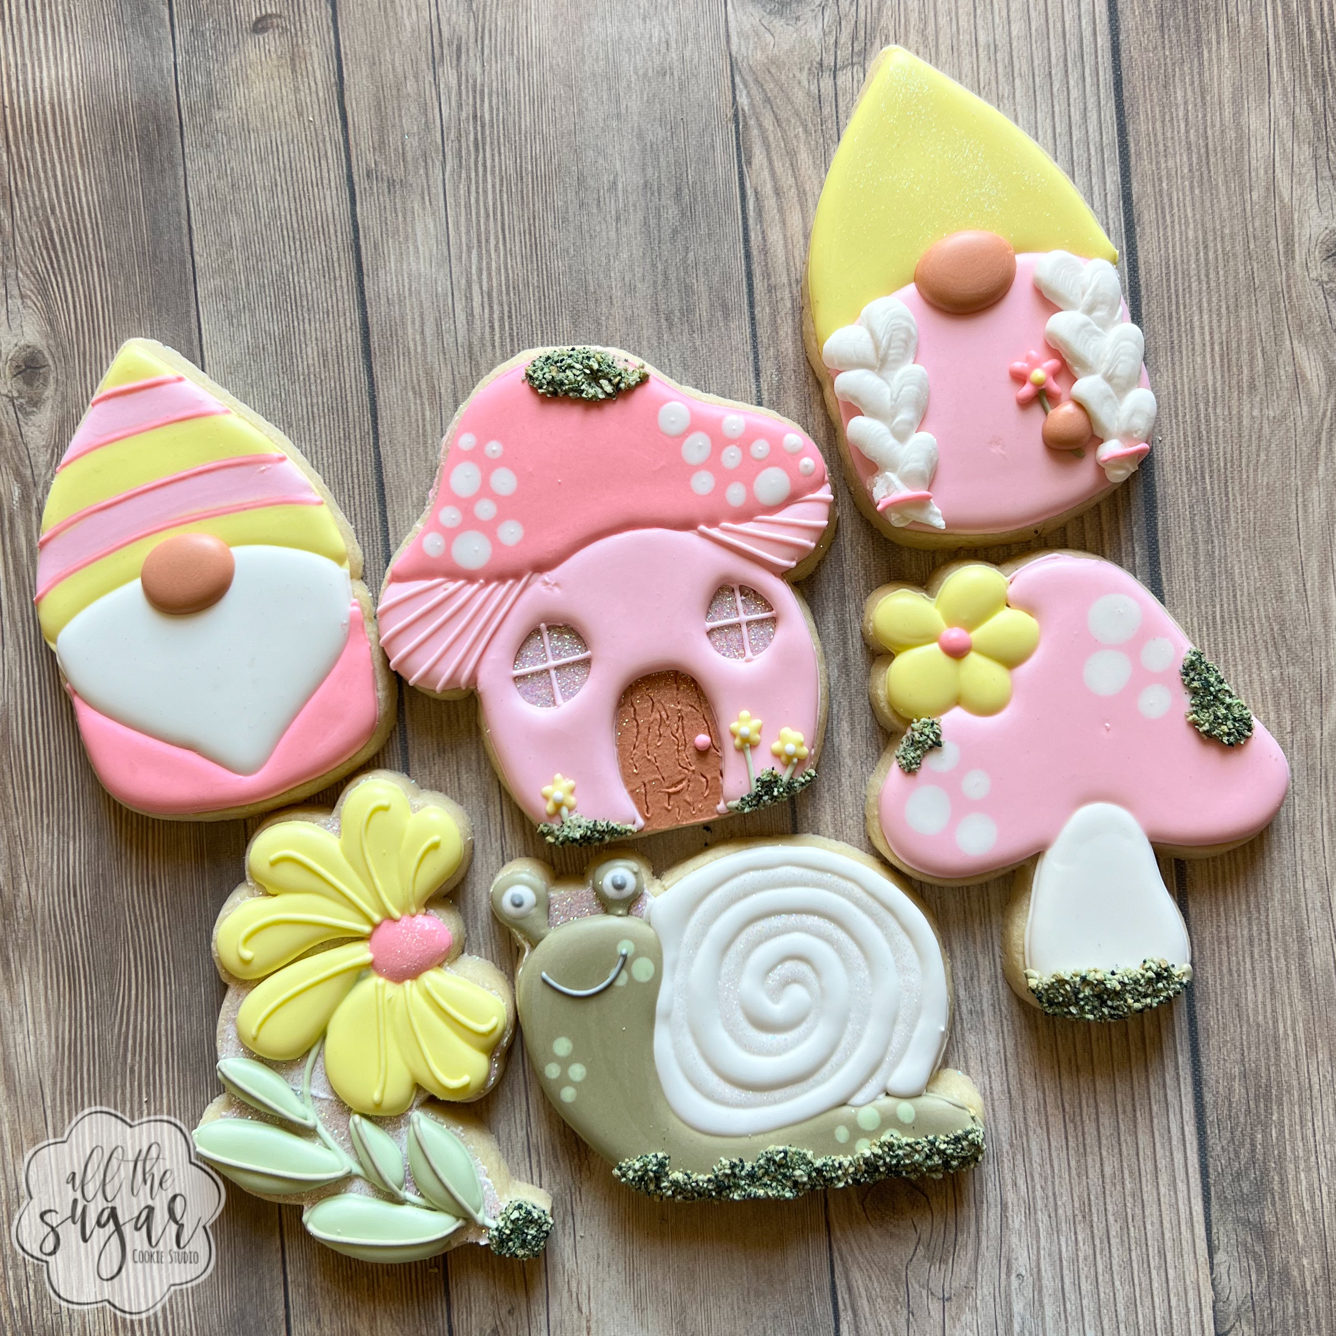 Decorating a Mushroom Sugar Cookie with Royal Icing 